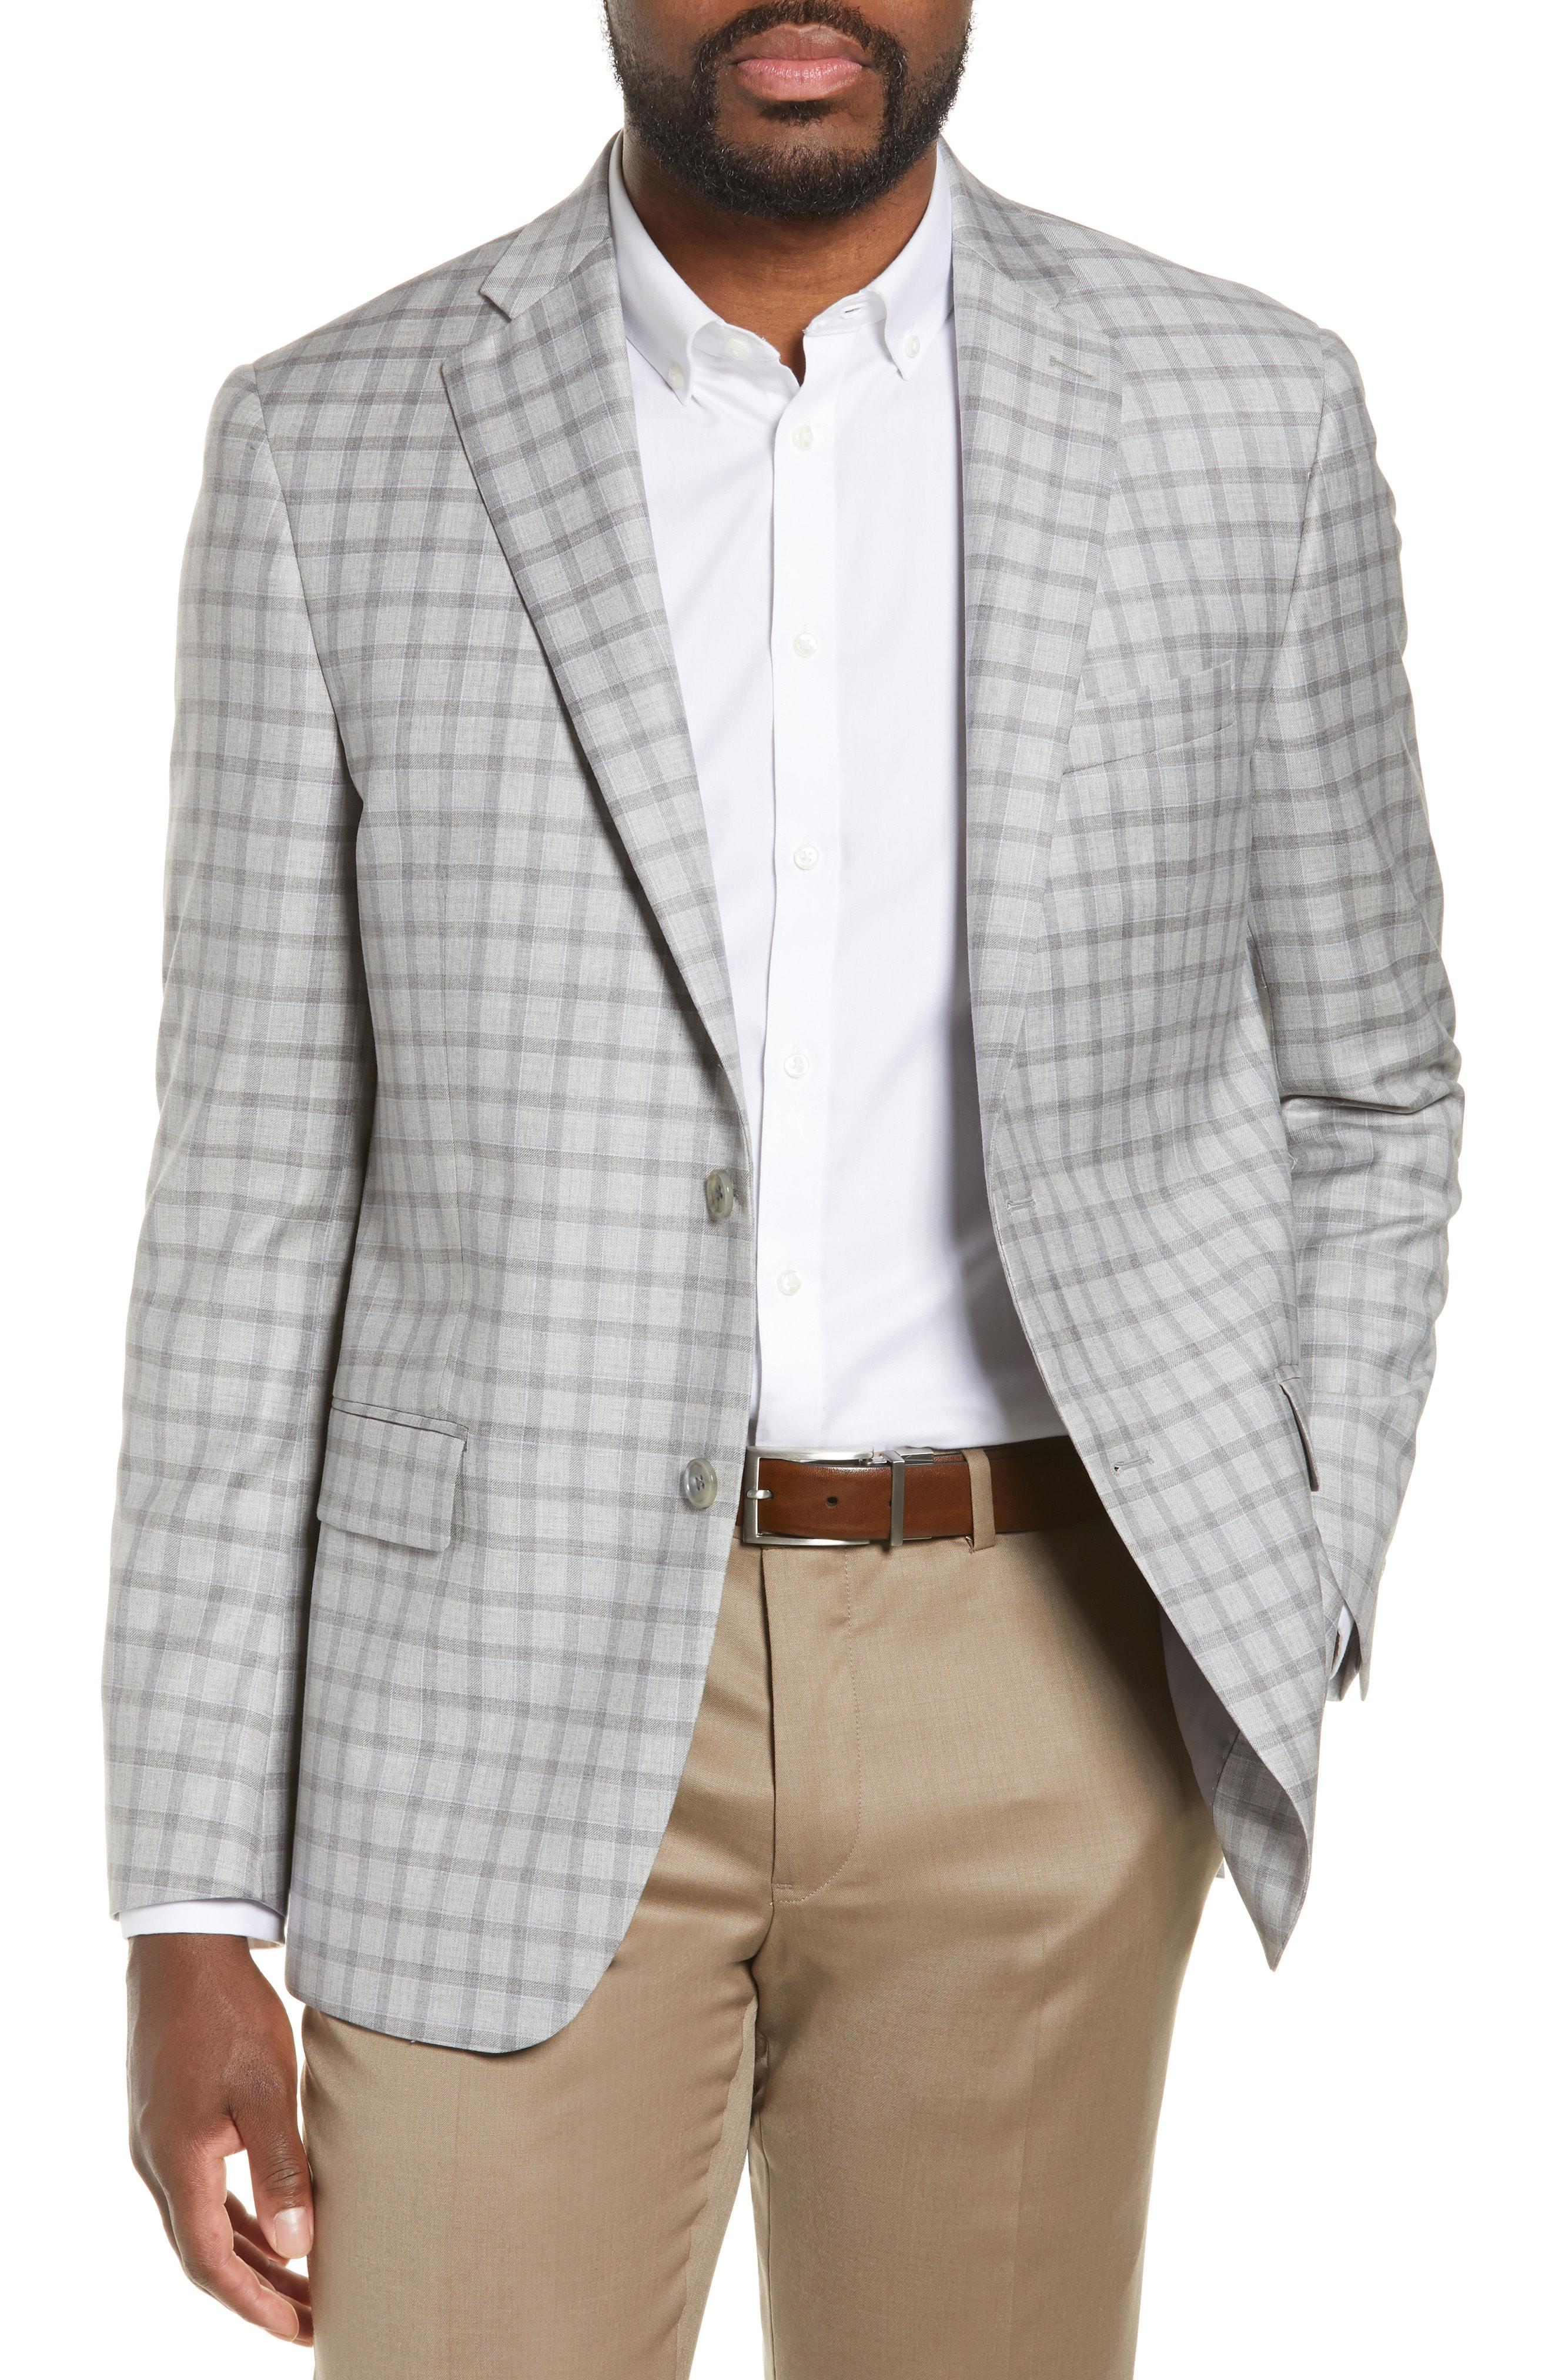 Lyst - Hart Schaffner Marx Classic Fit Check Wool Sport Coat in Gray ...